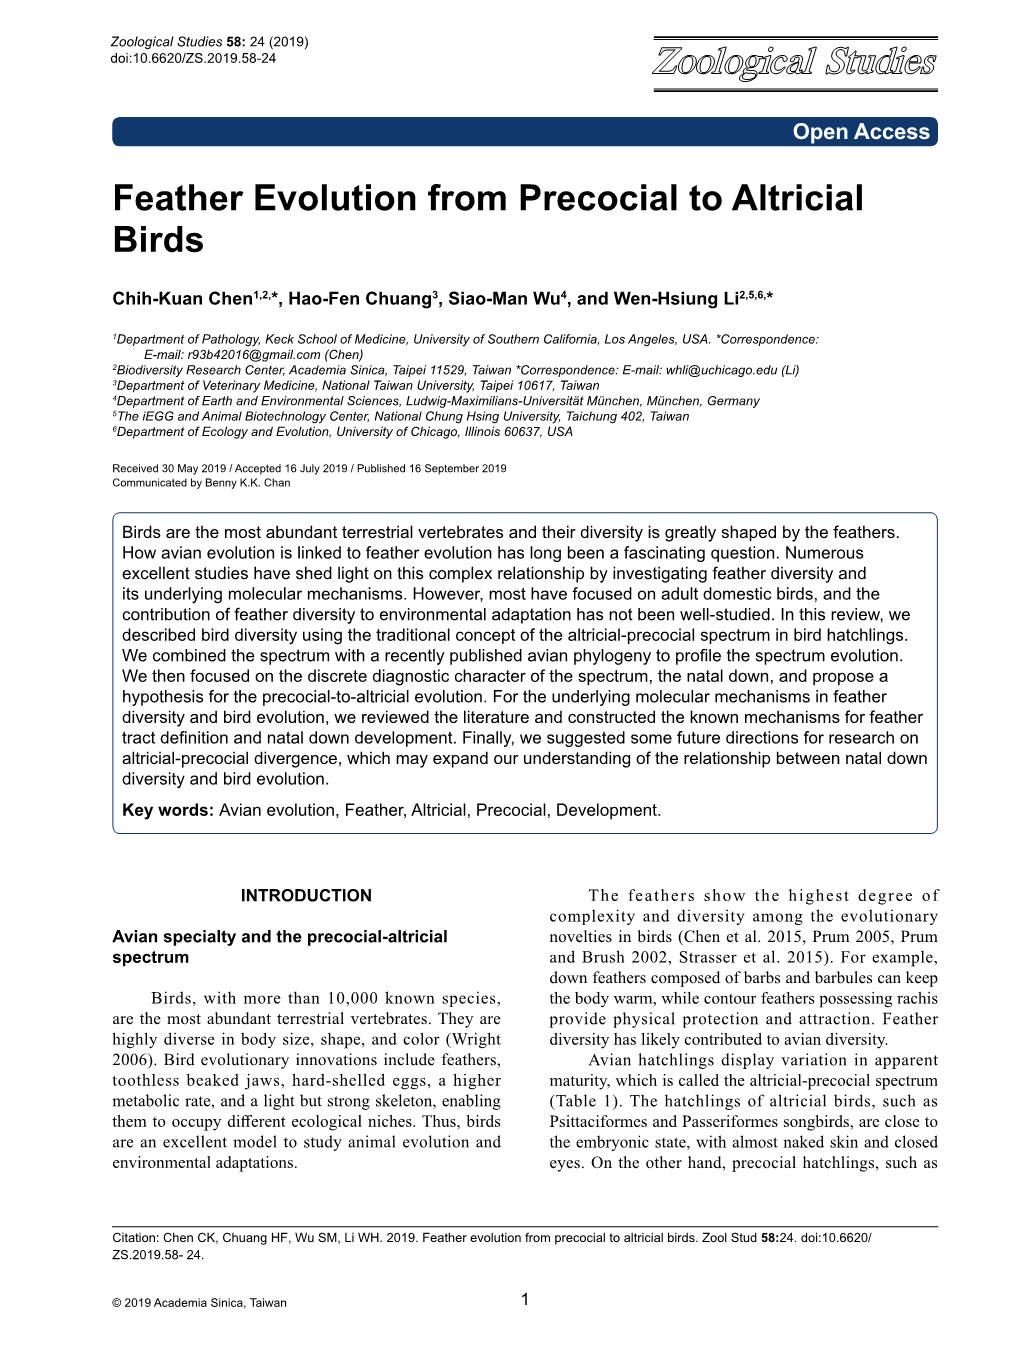 Feather Evolution from Precocial to Altricial Birds